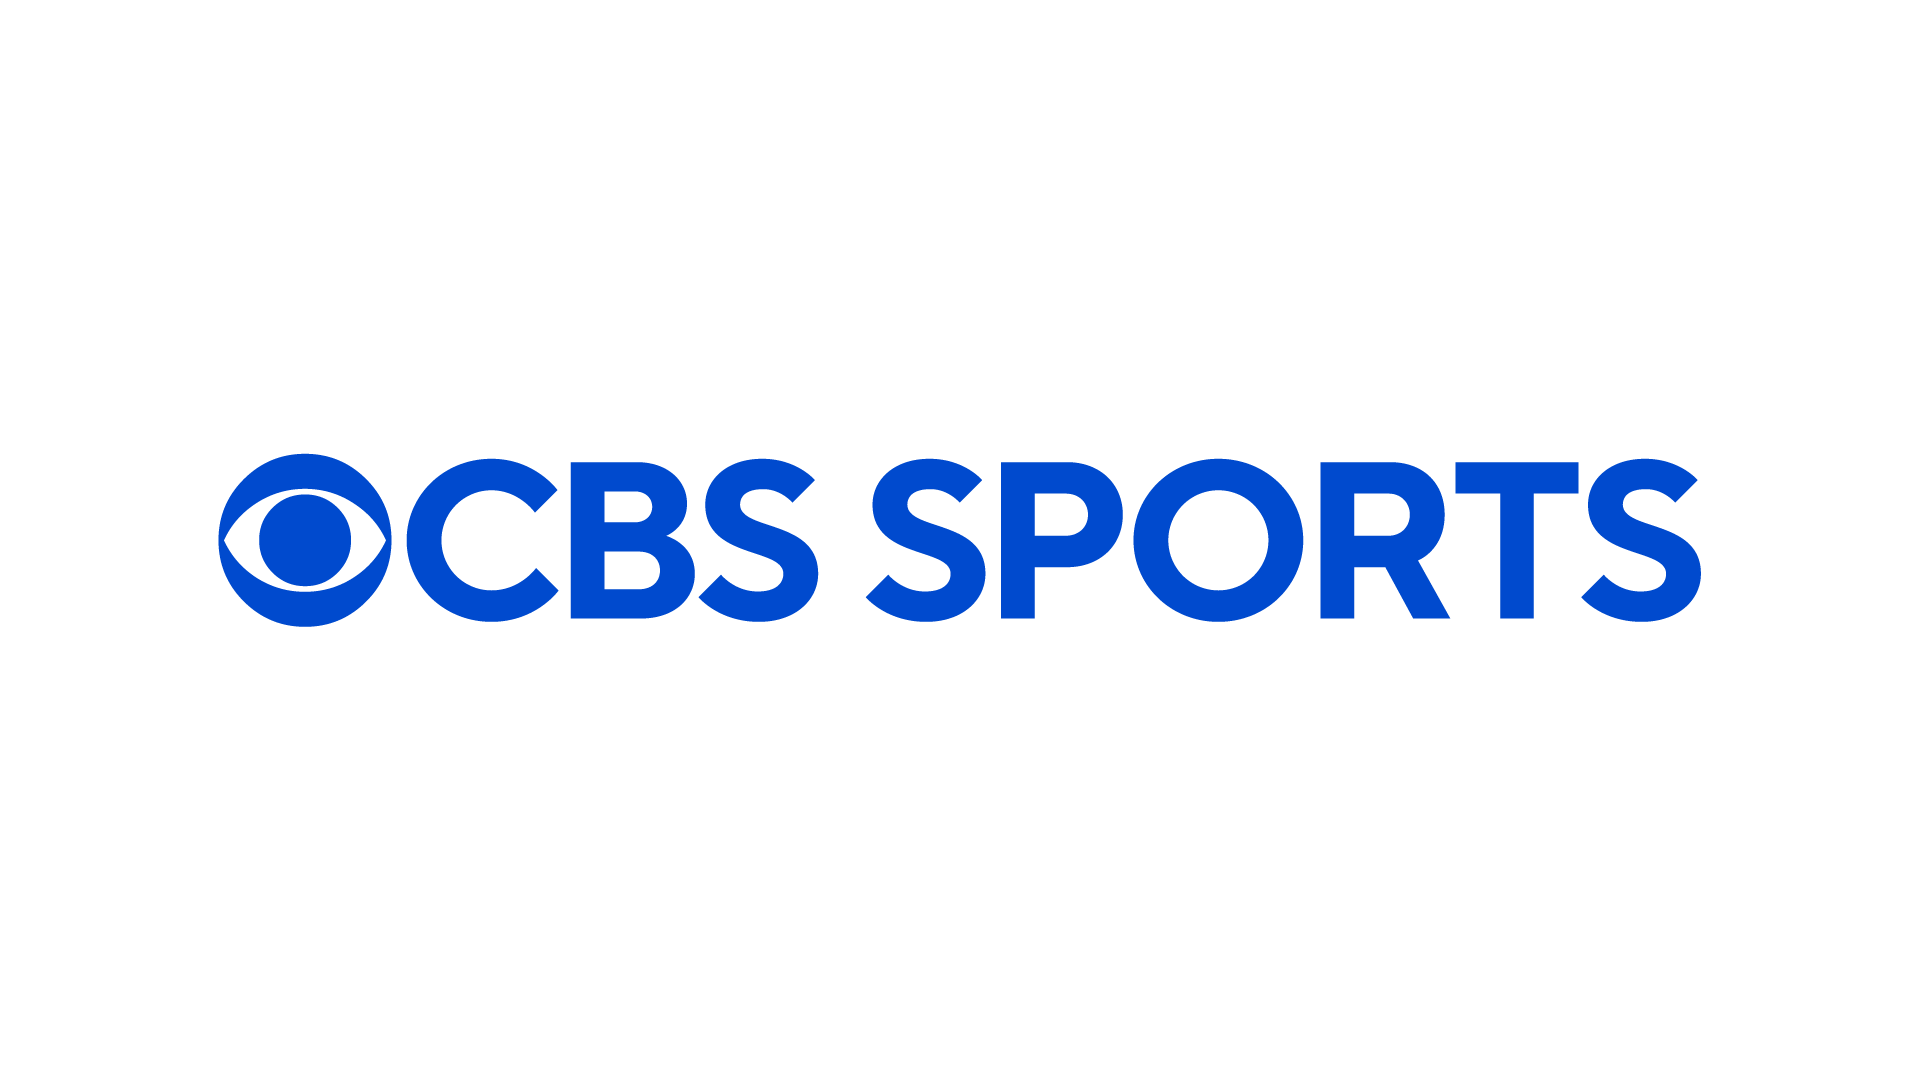 CBS Sports to Present Culmination of PGA TOUR Season with Weekend Coverage of Entire FedExCup Playoffs for First Time